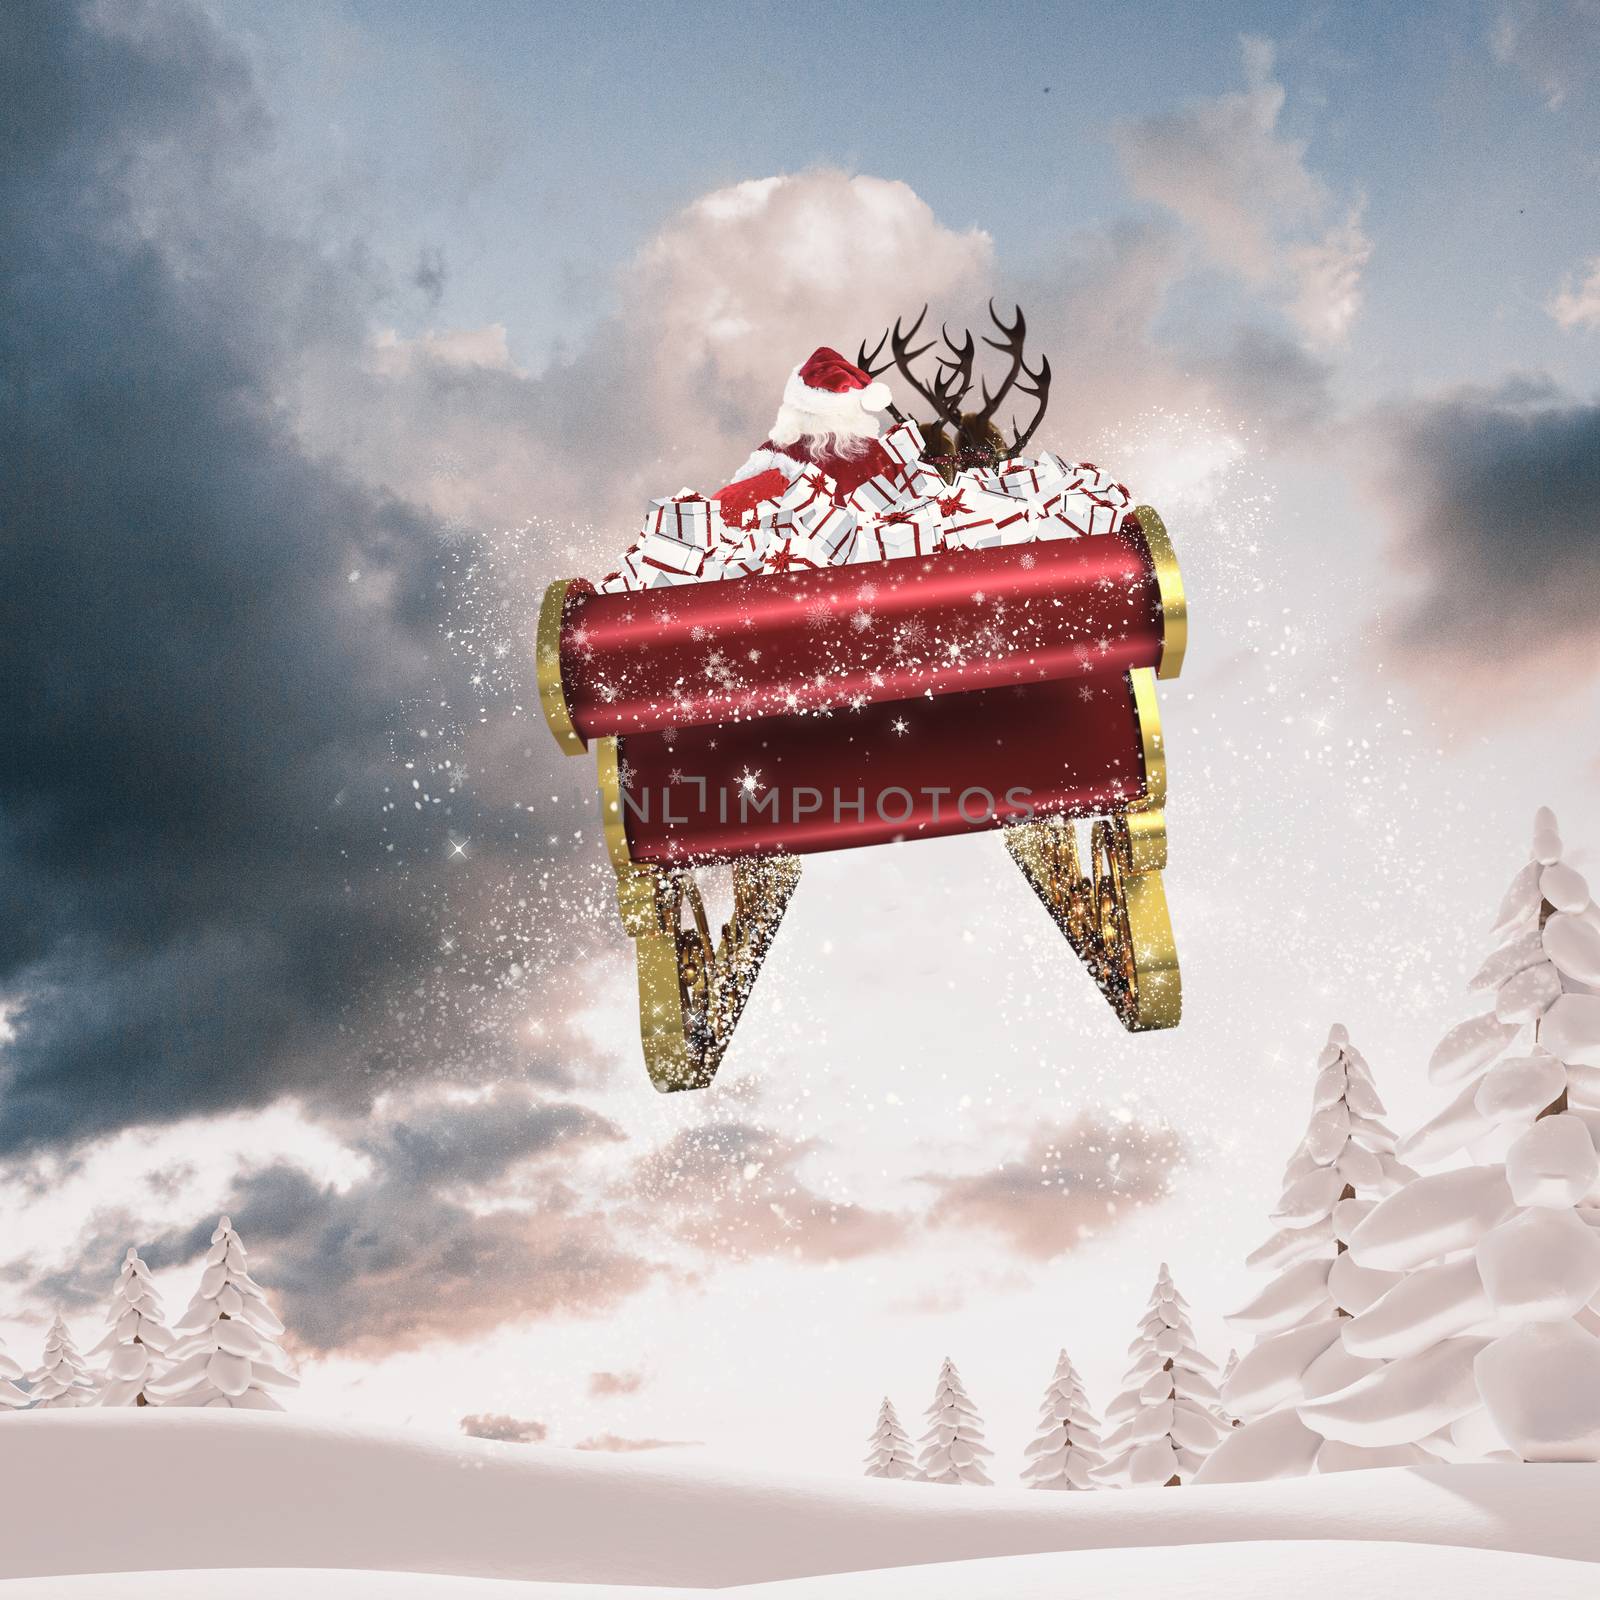 Santa flying his sleigh against snowy landscape with fir trees